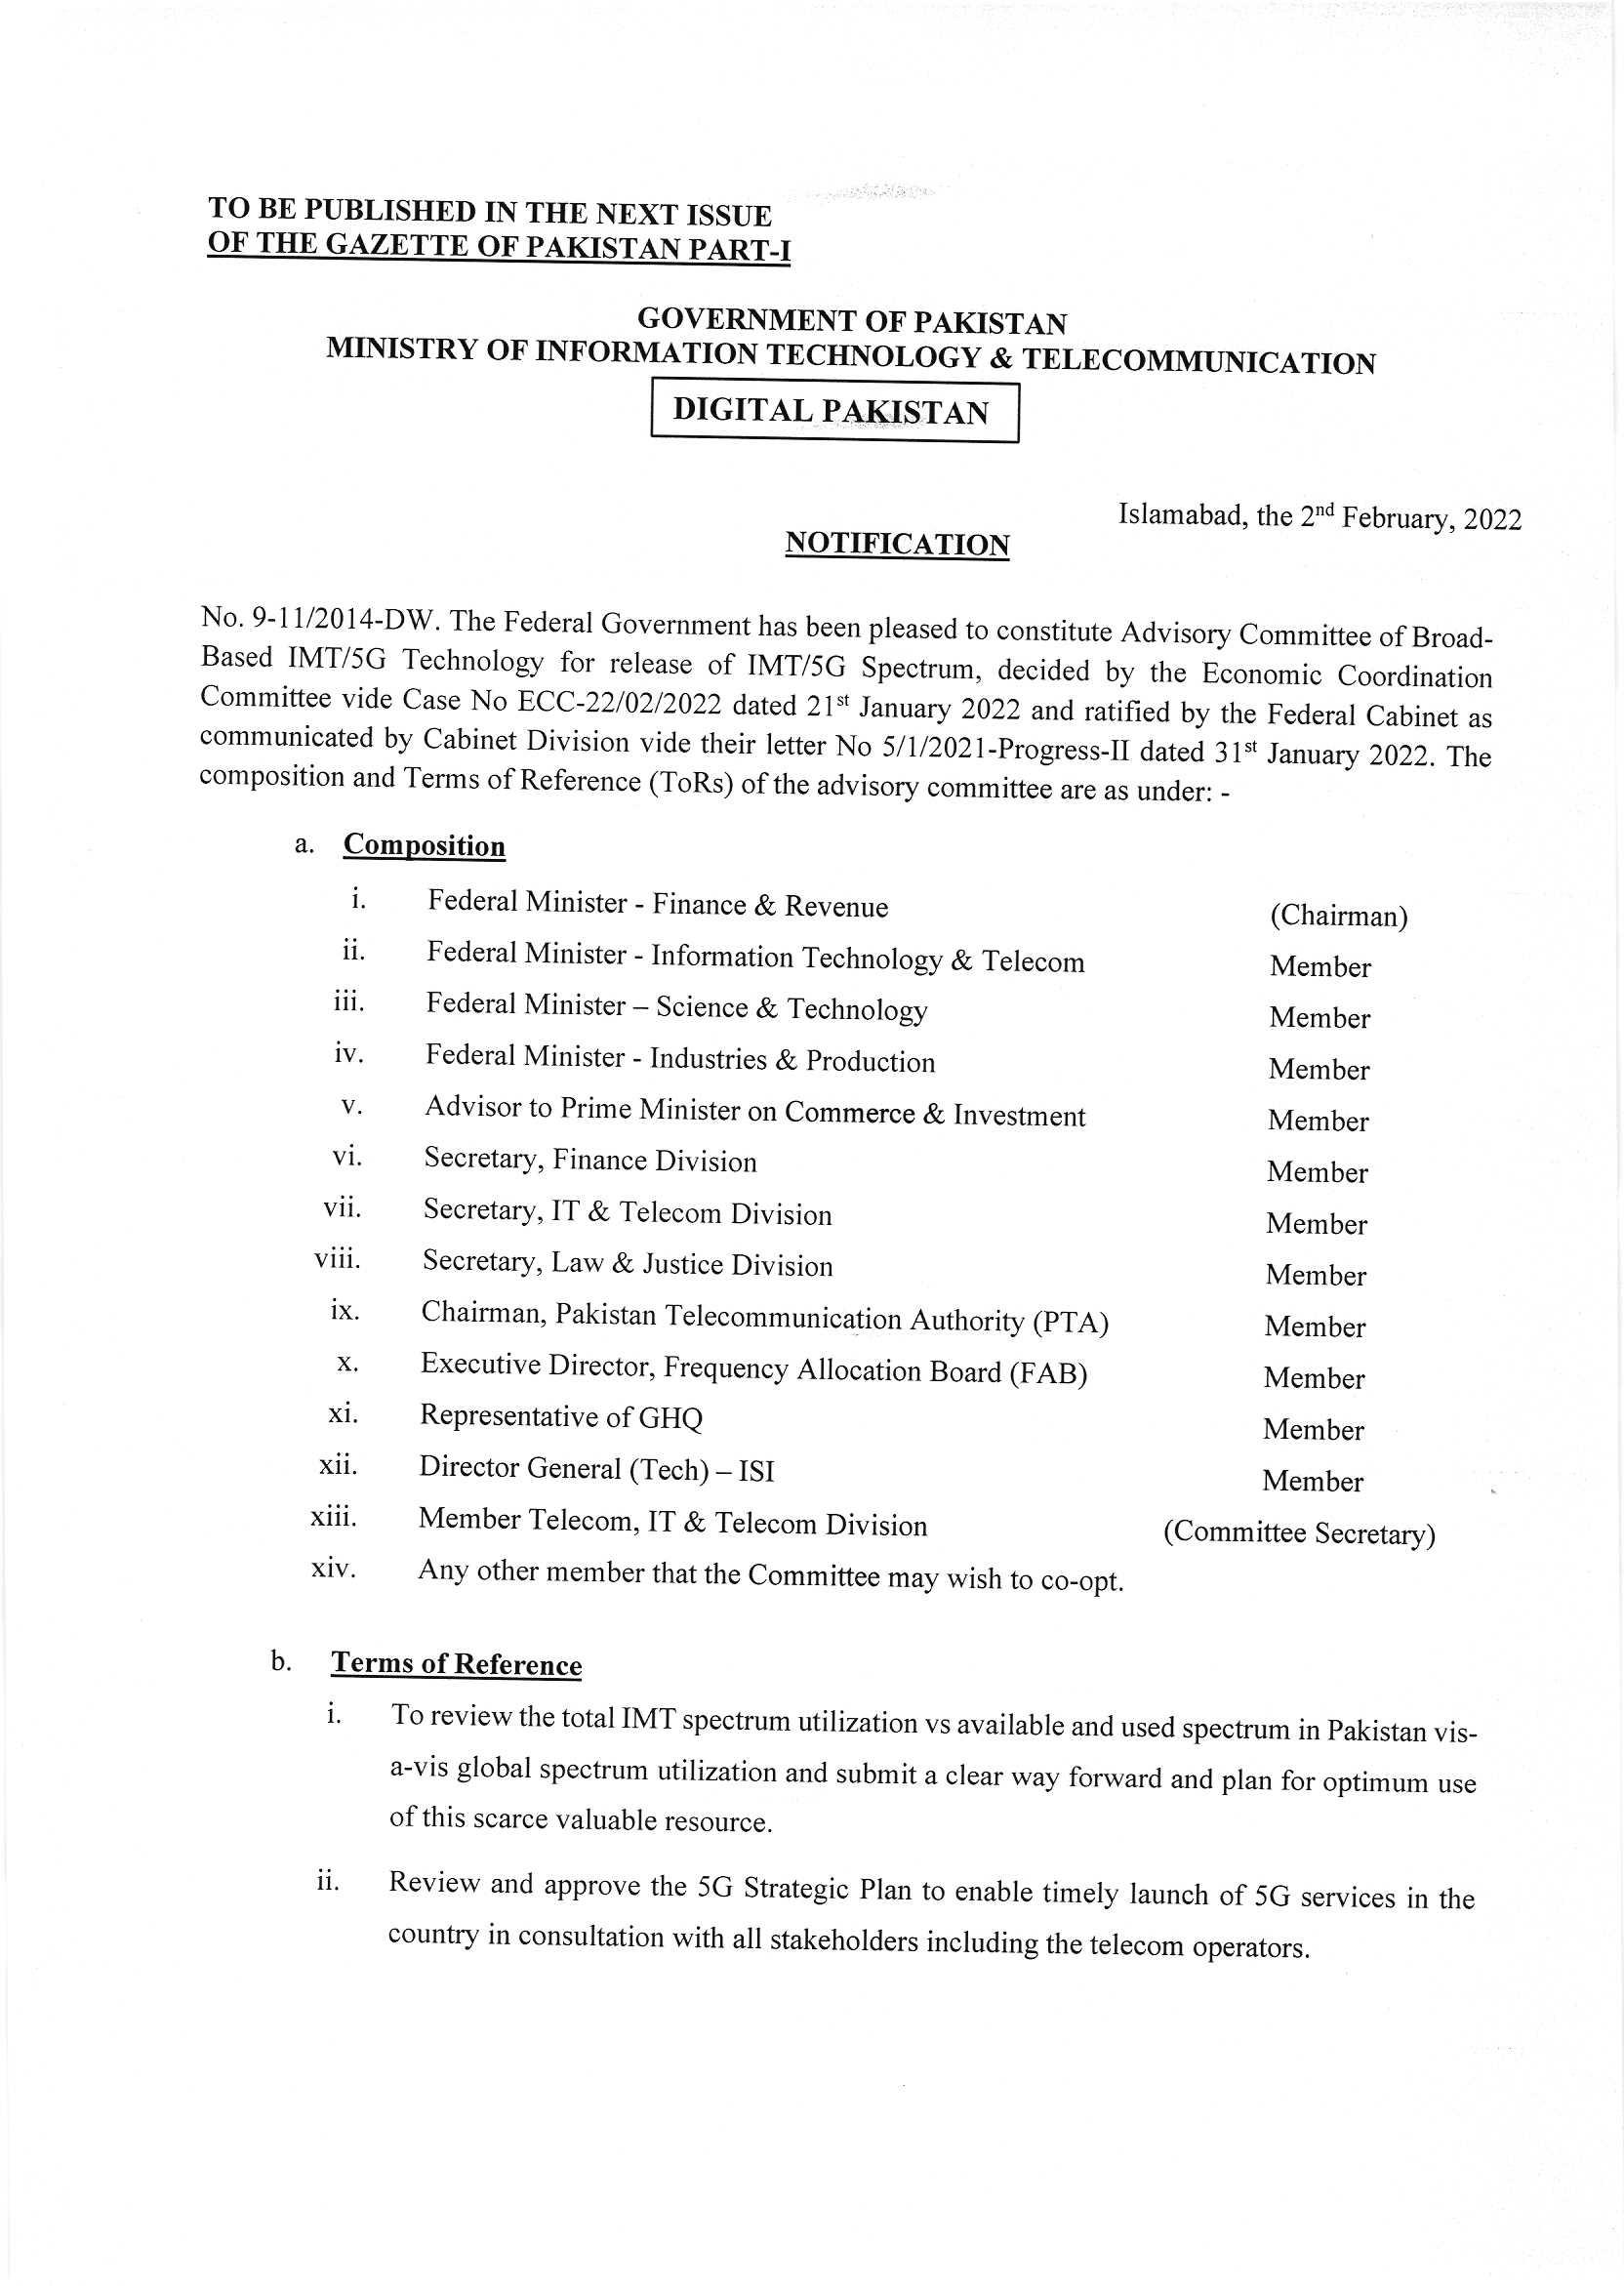 Government of Pakistan, Ministry of Information Technology and Telecom